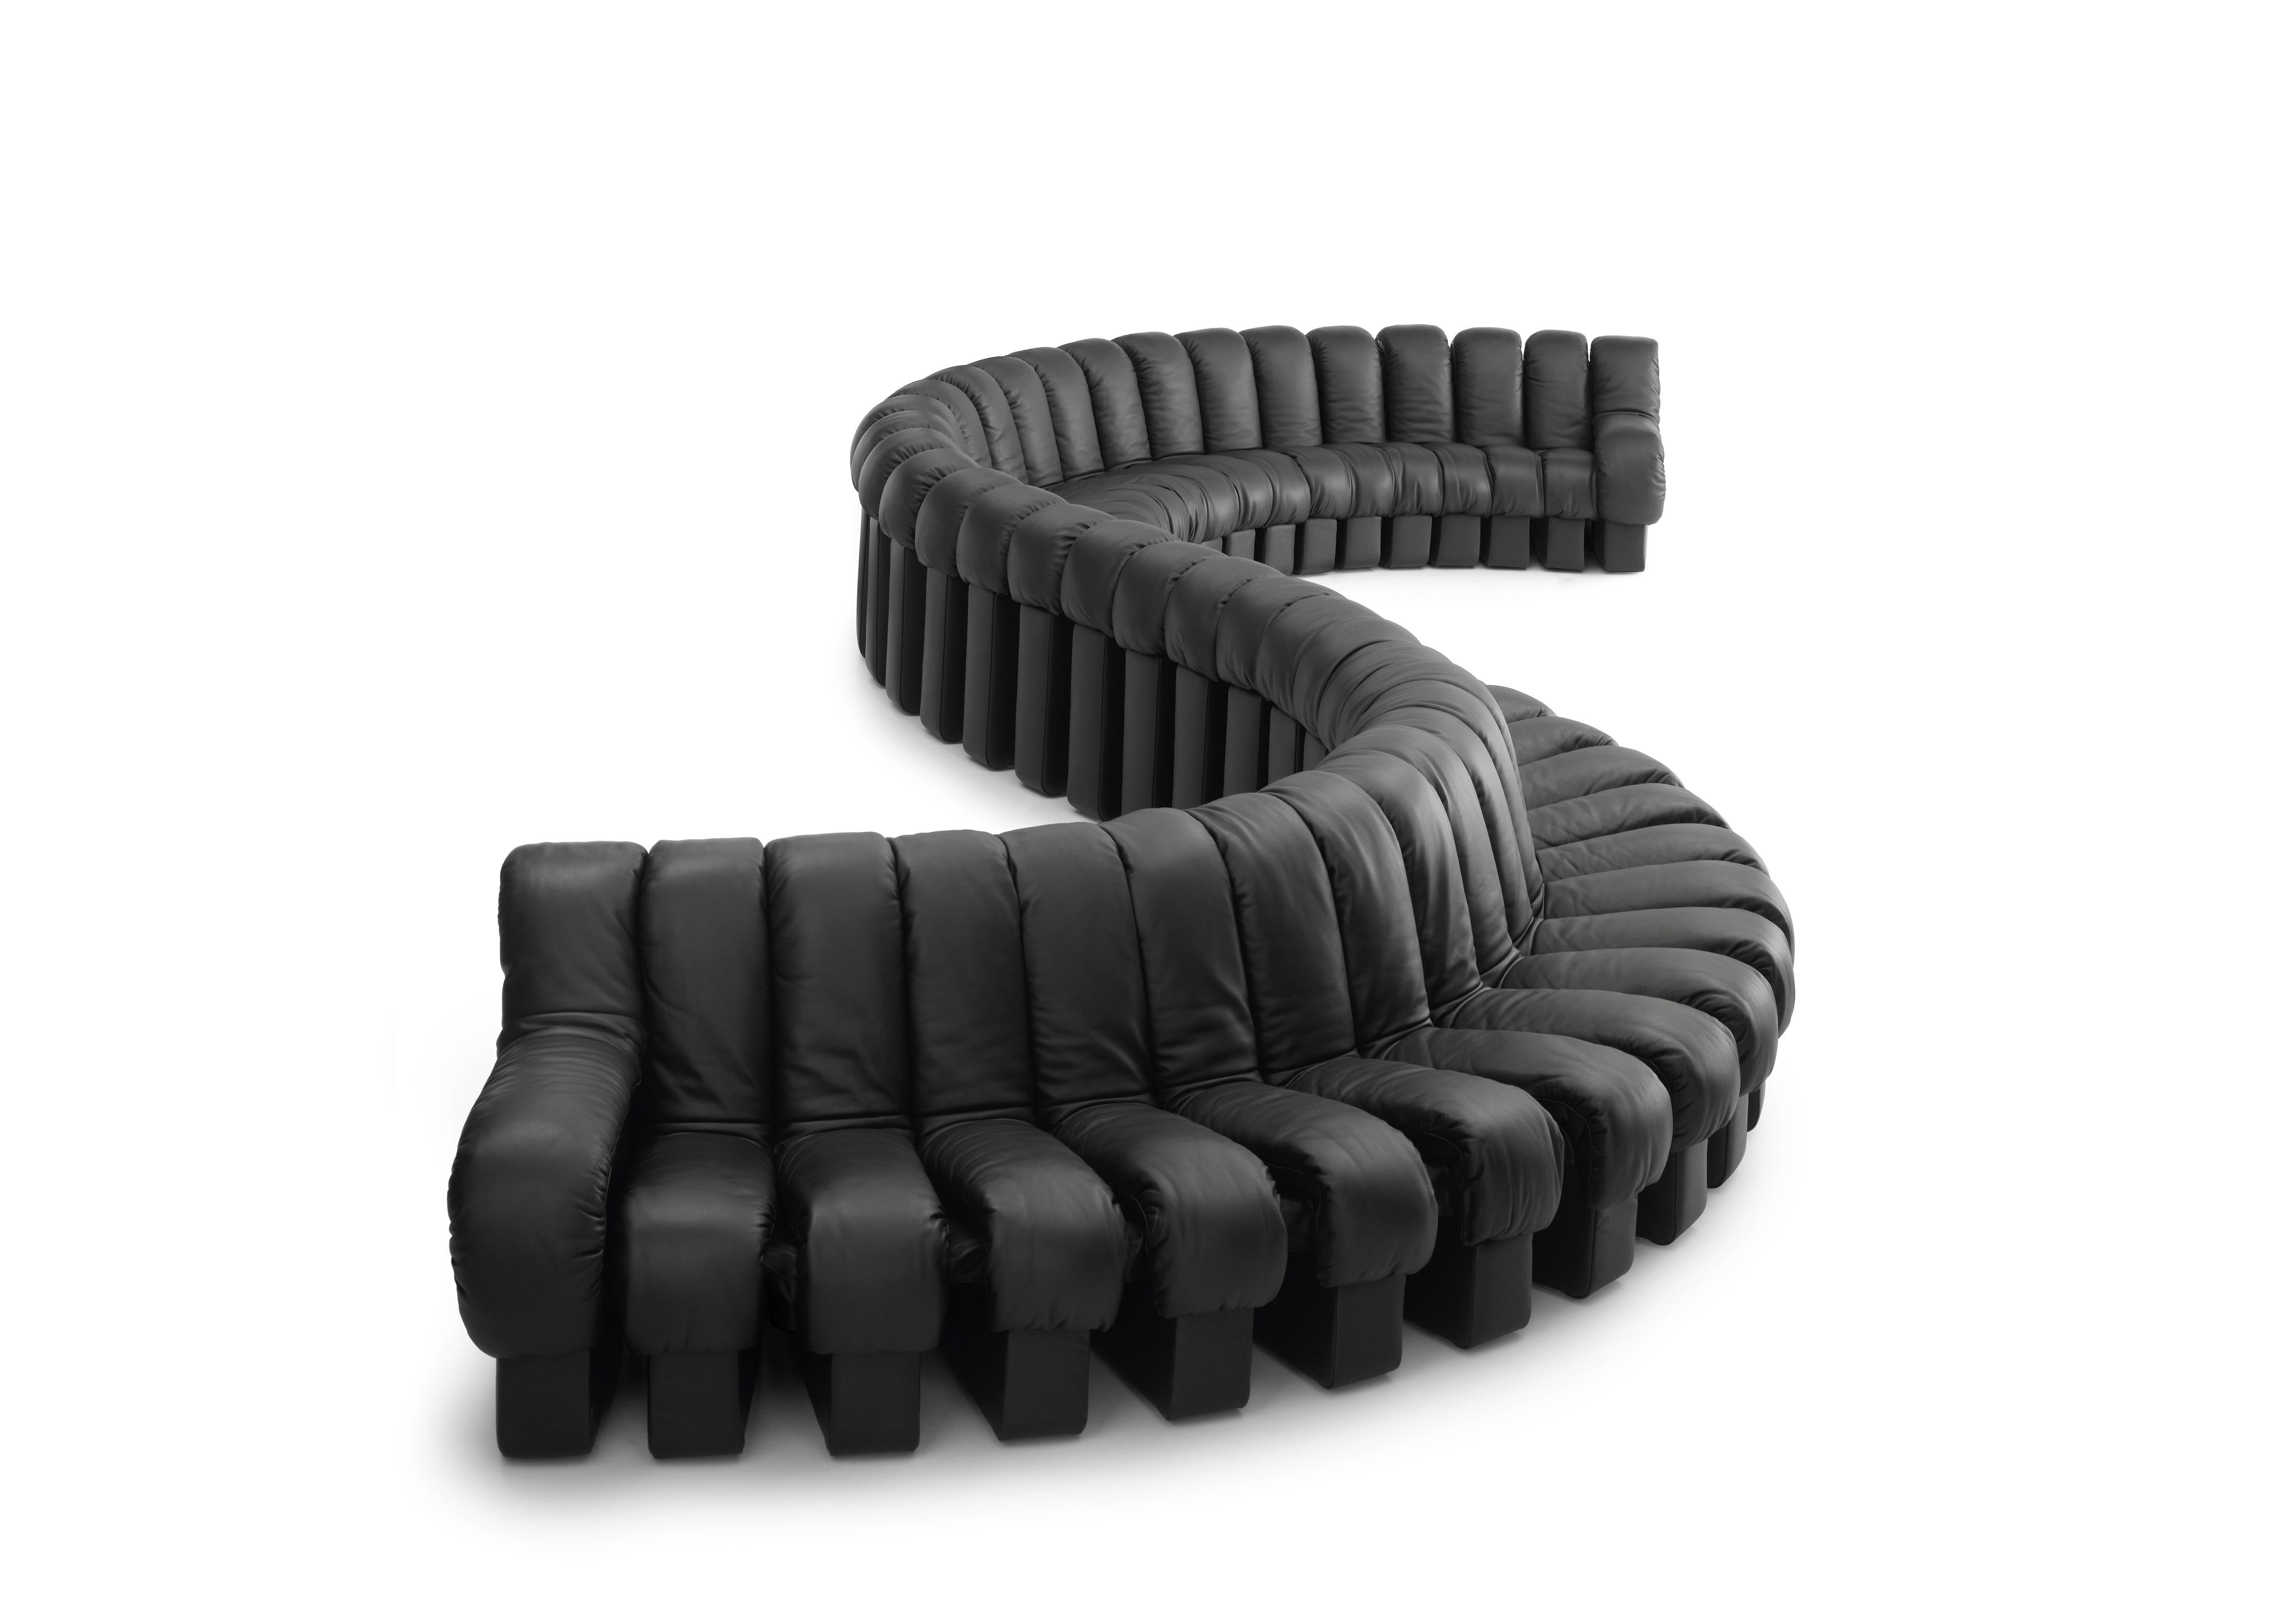 De Sede DS 600 'Snake' Seating Landscape with 80 Elements in Nappa Leather  For Sale 1